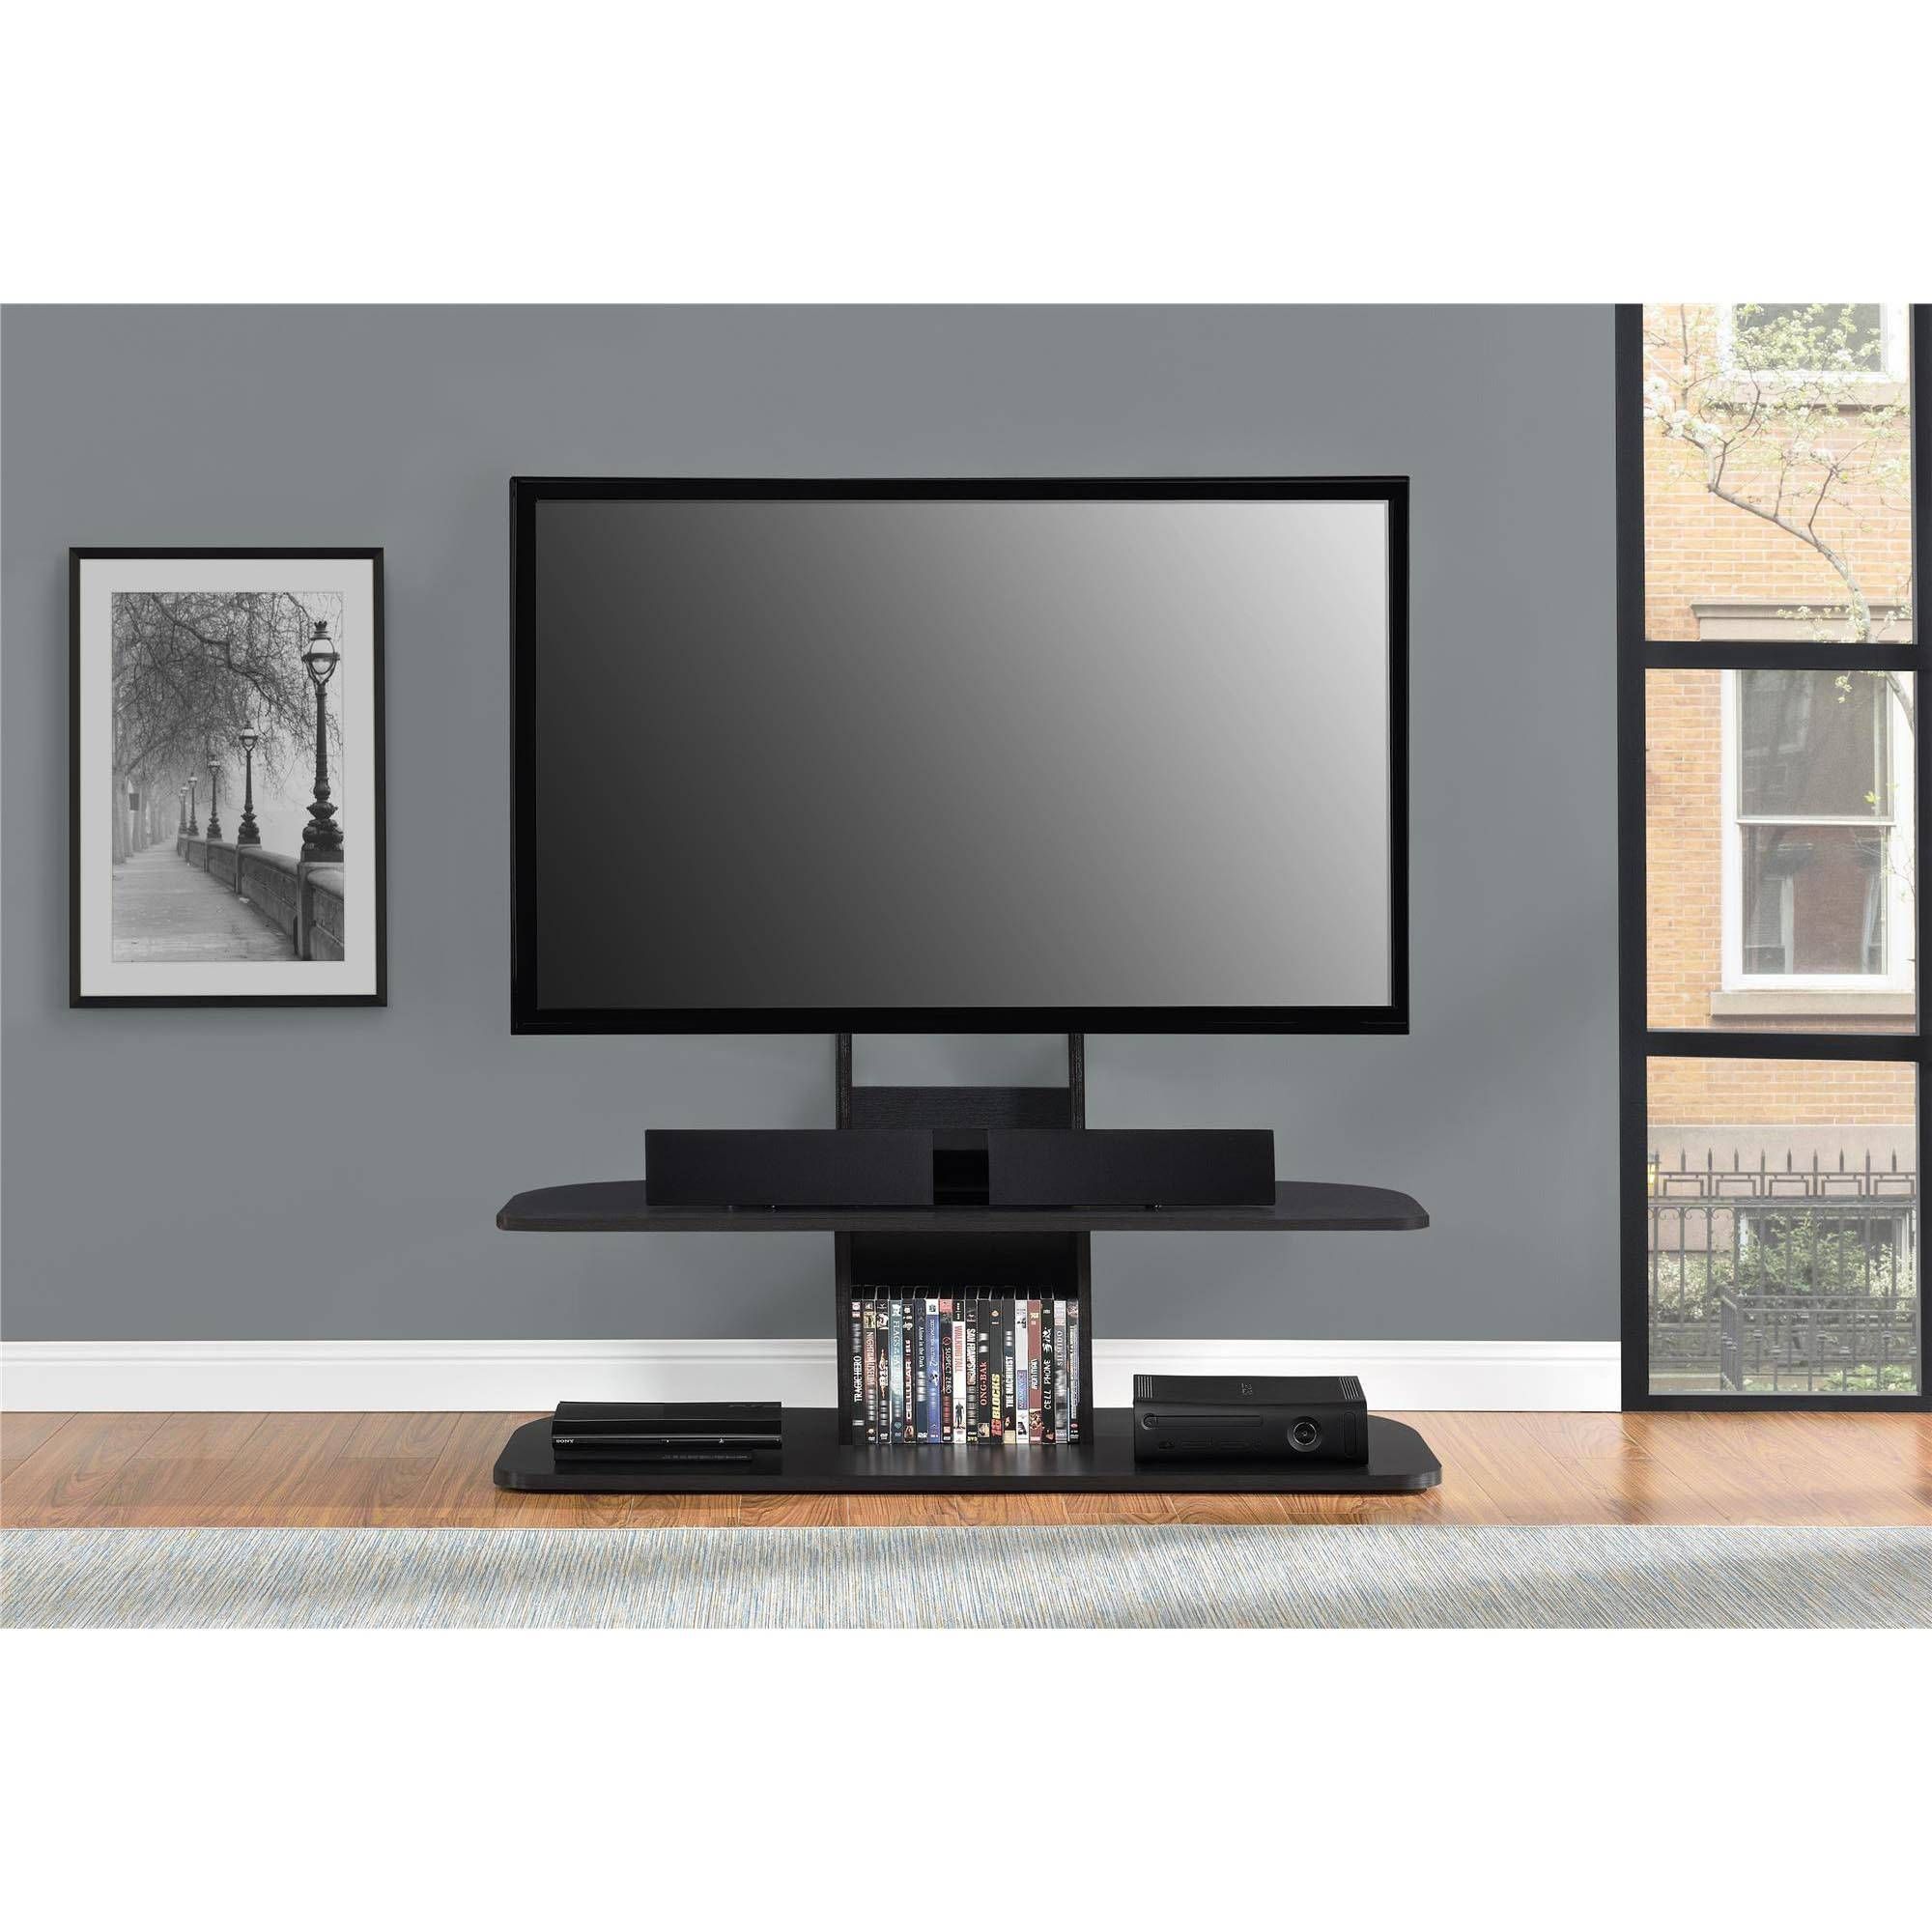 Whalen 2 Shelf Tv Stand With Mount For Tvs Up To 50" – Walmart Pertaining To Tv Stand With Mount (View 5 of 15)